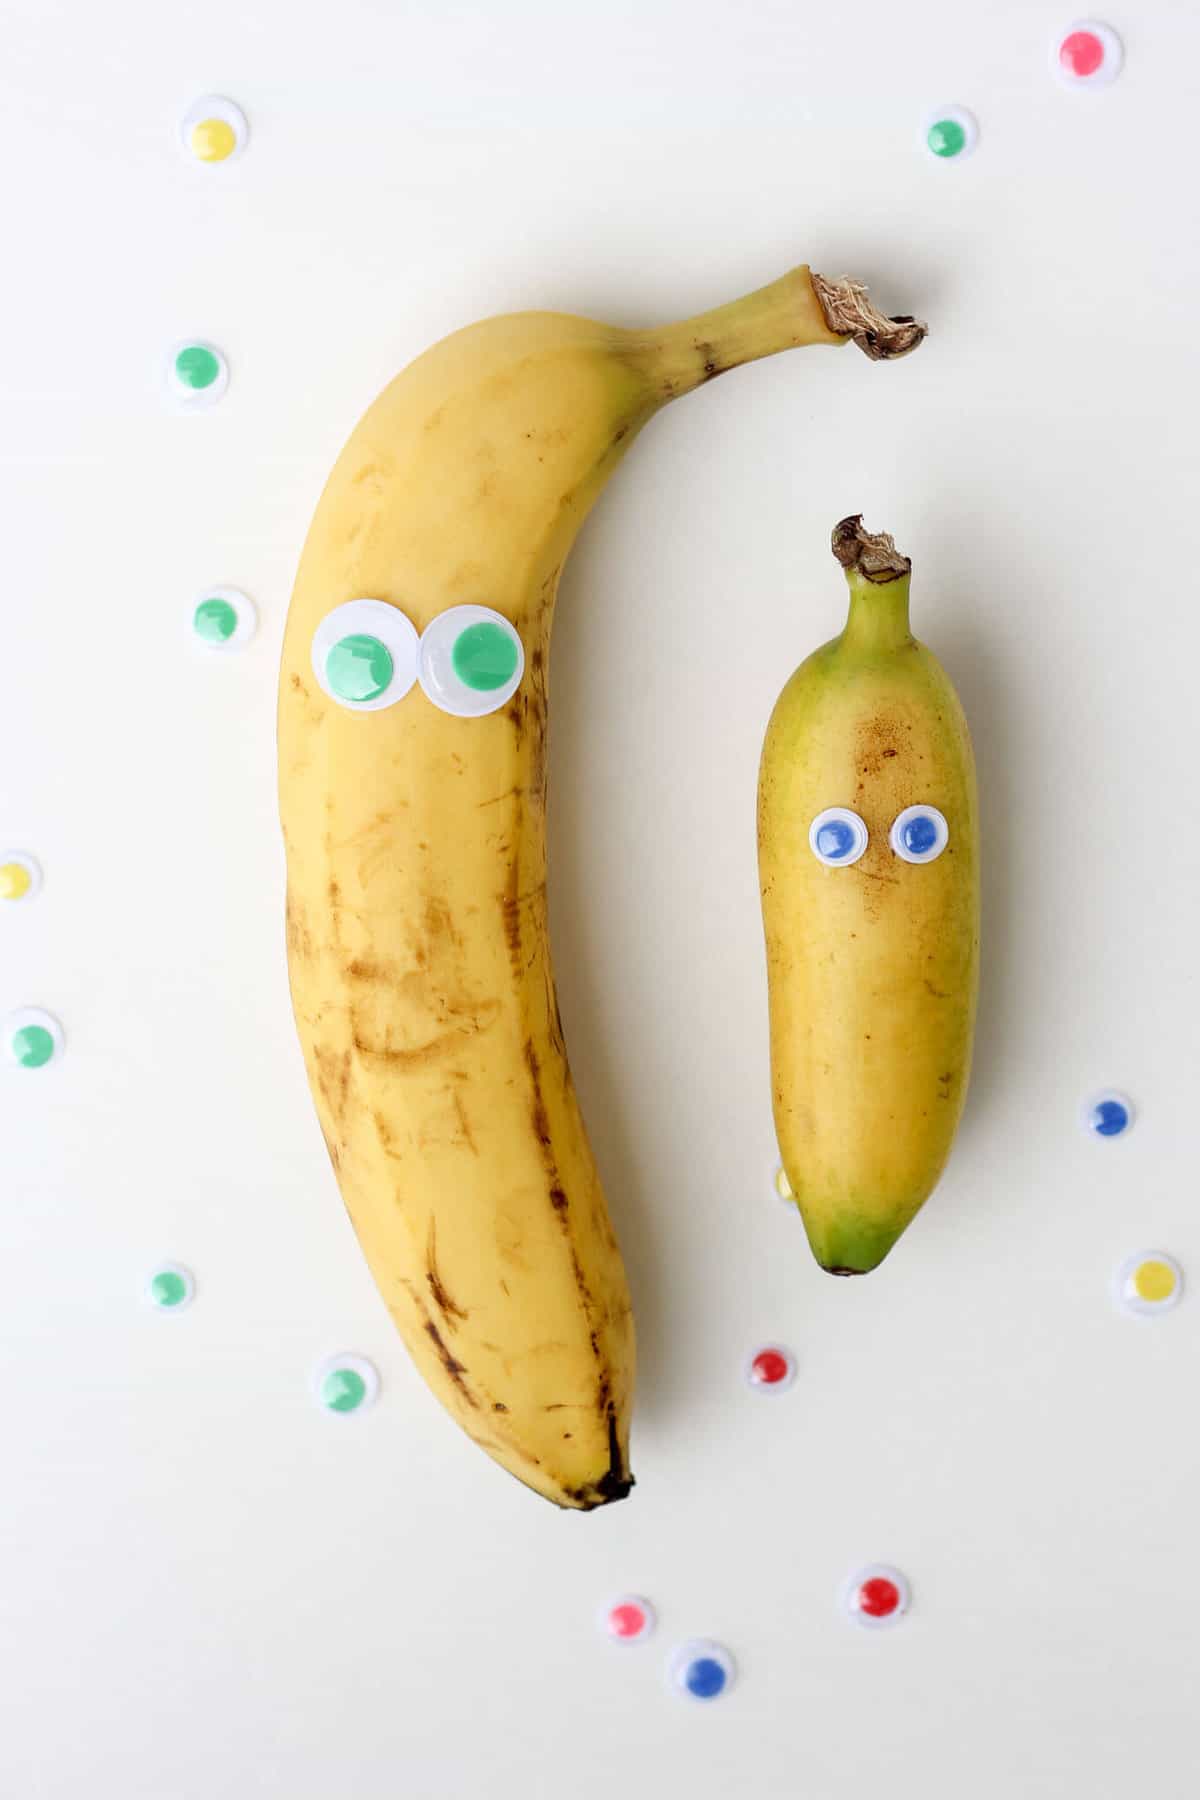 If you know a little one who will soon become a big sister or a big brother, create a playful occasion to talk about the transition with this fun banana craft idea. Great art activity for toddlers and young kids. | MakeAndDoCrew.com